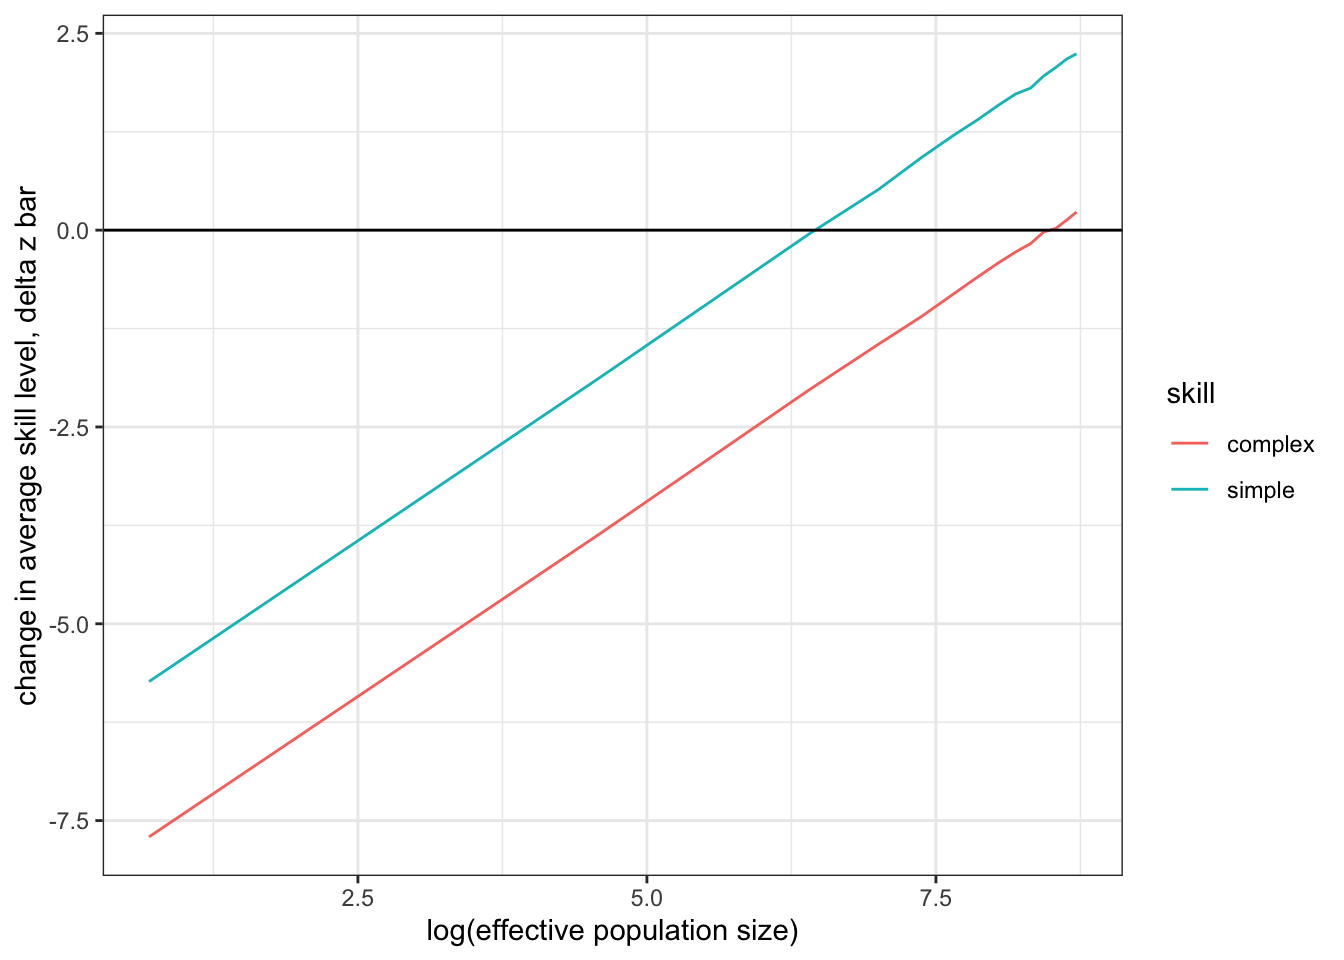 The same results as in Figure \@ref(fig:13-7) but using log on population sizes.